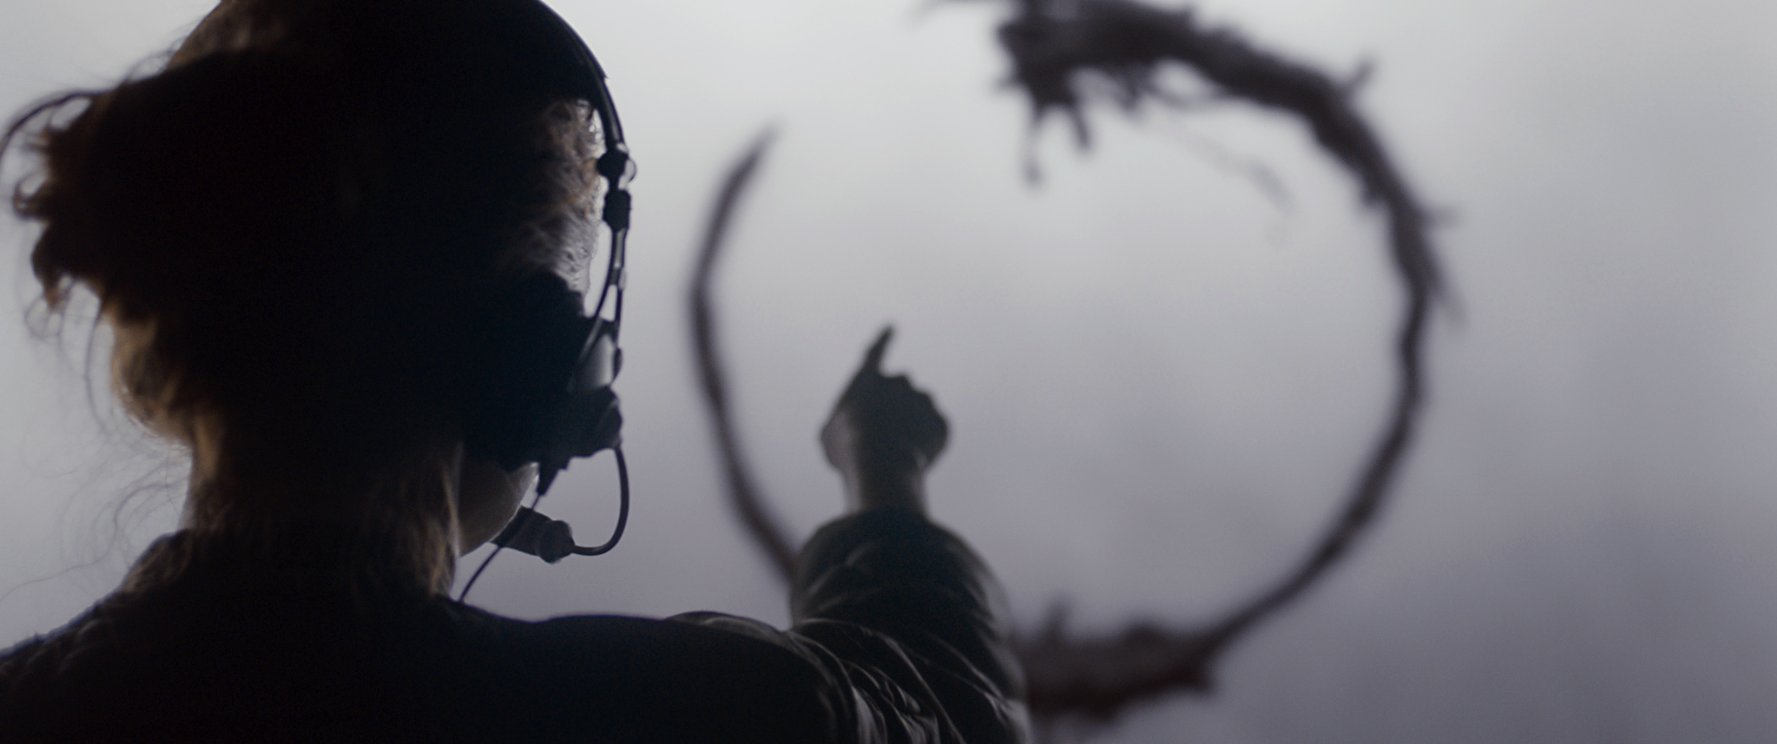 ARRIVAL 2016